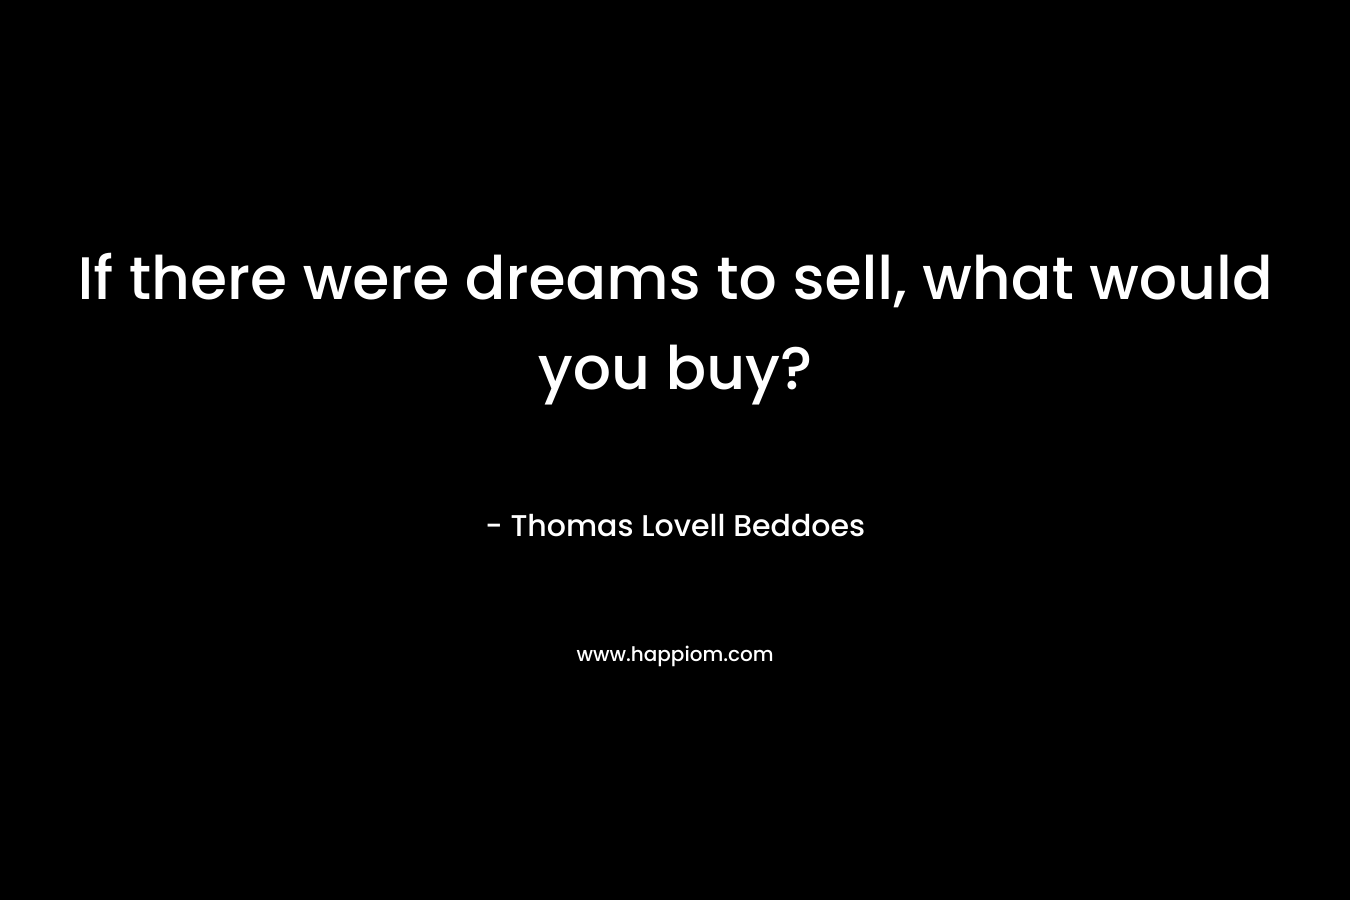 If there were dreams to sell, what would you buy?